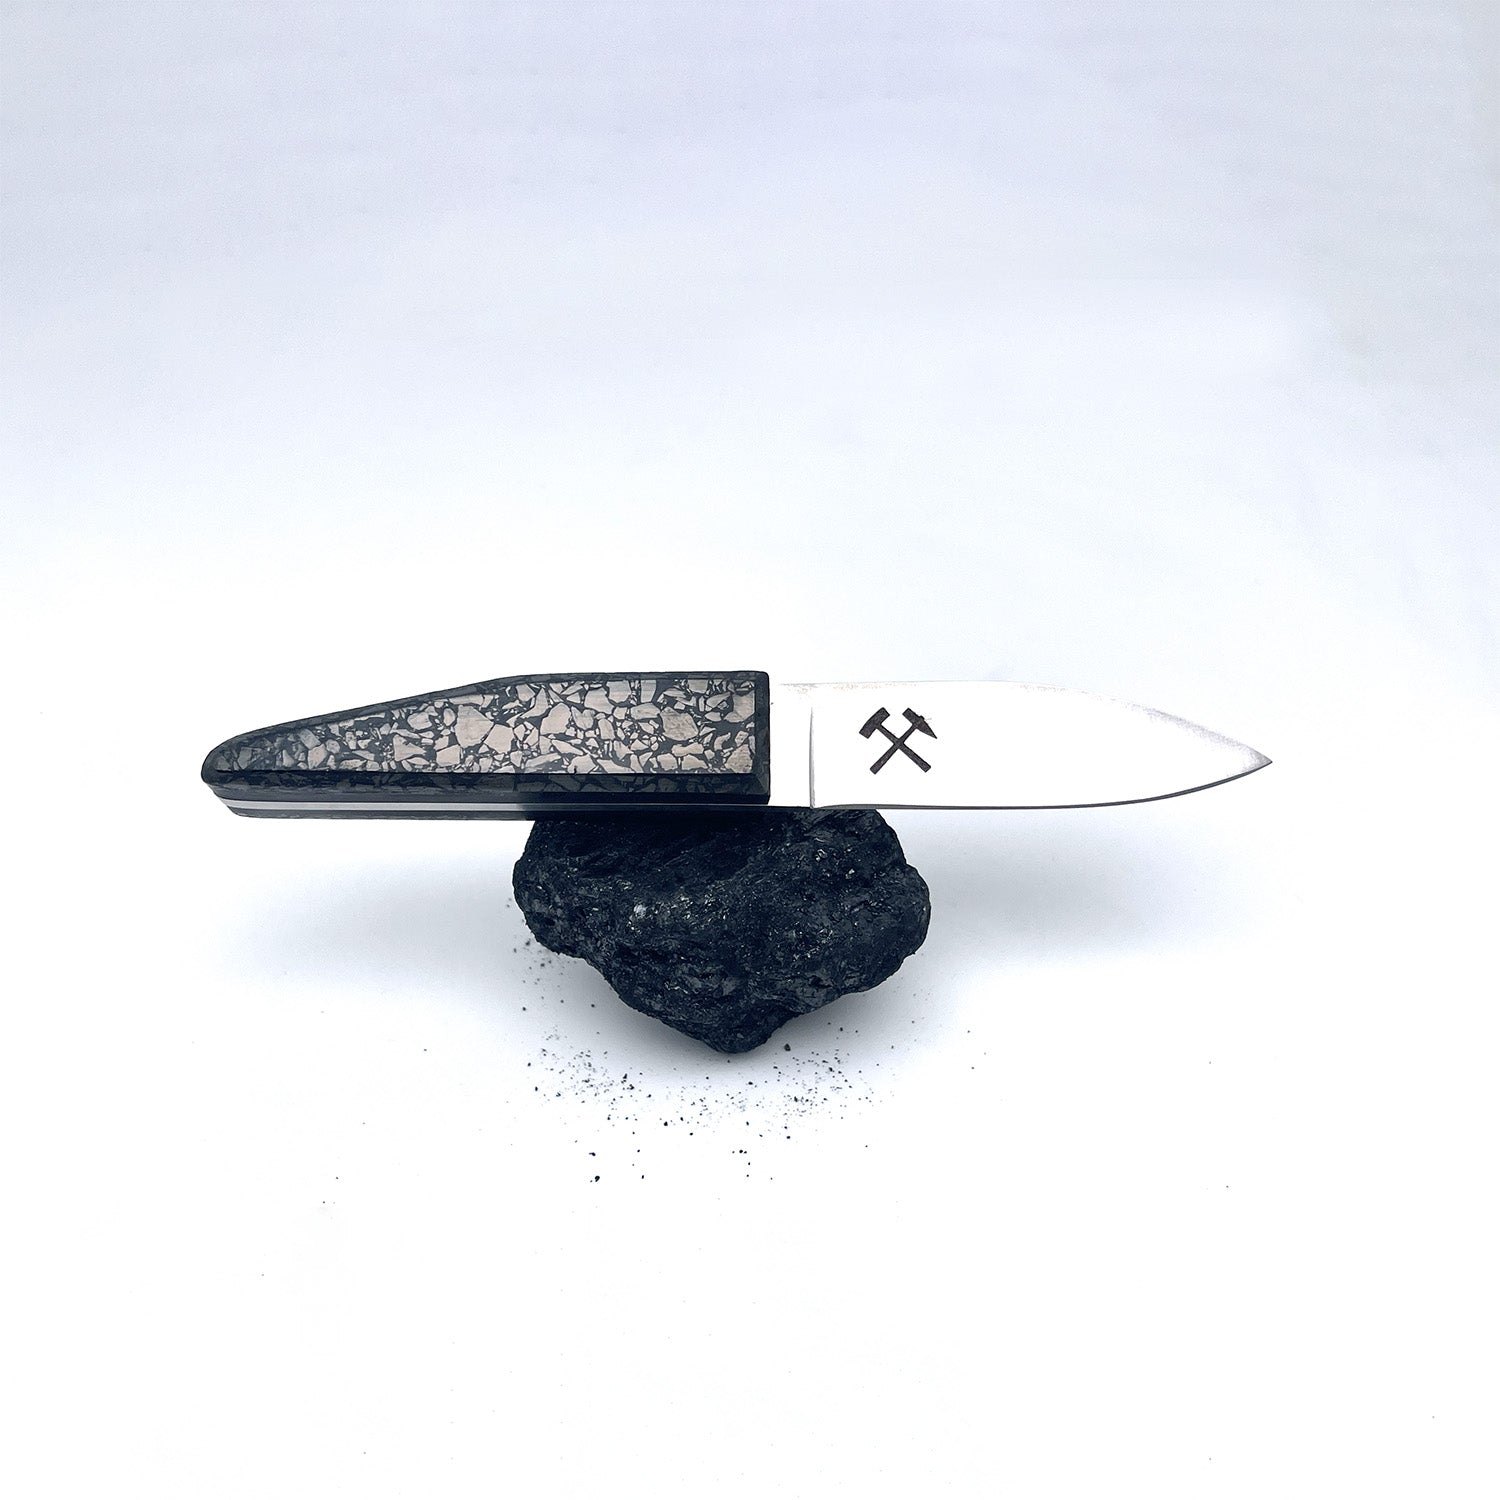 Small oyster knife with a polished charcoal handle